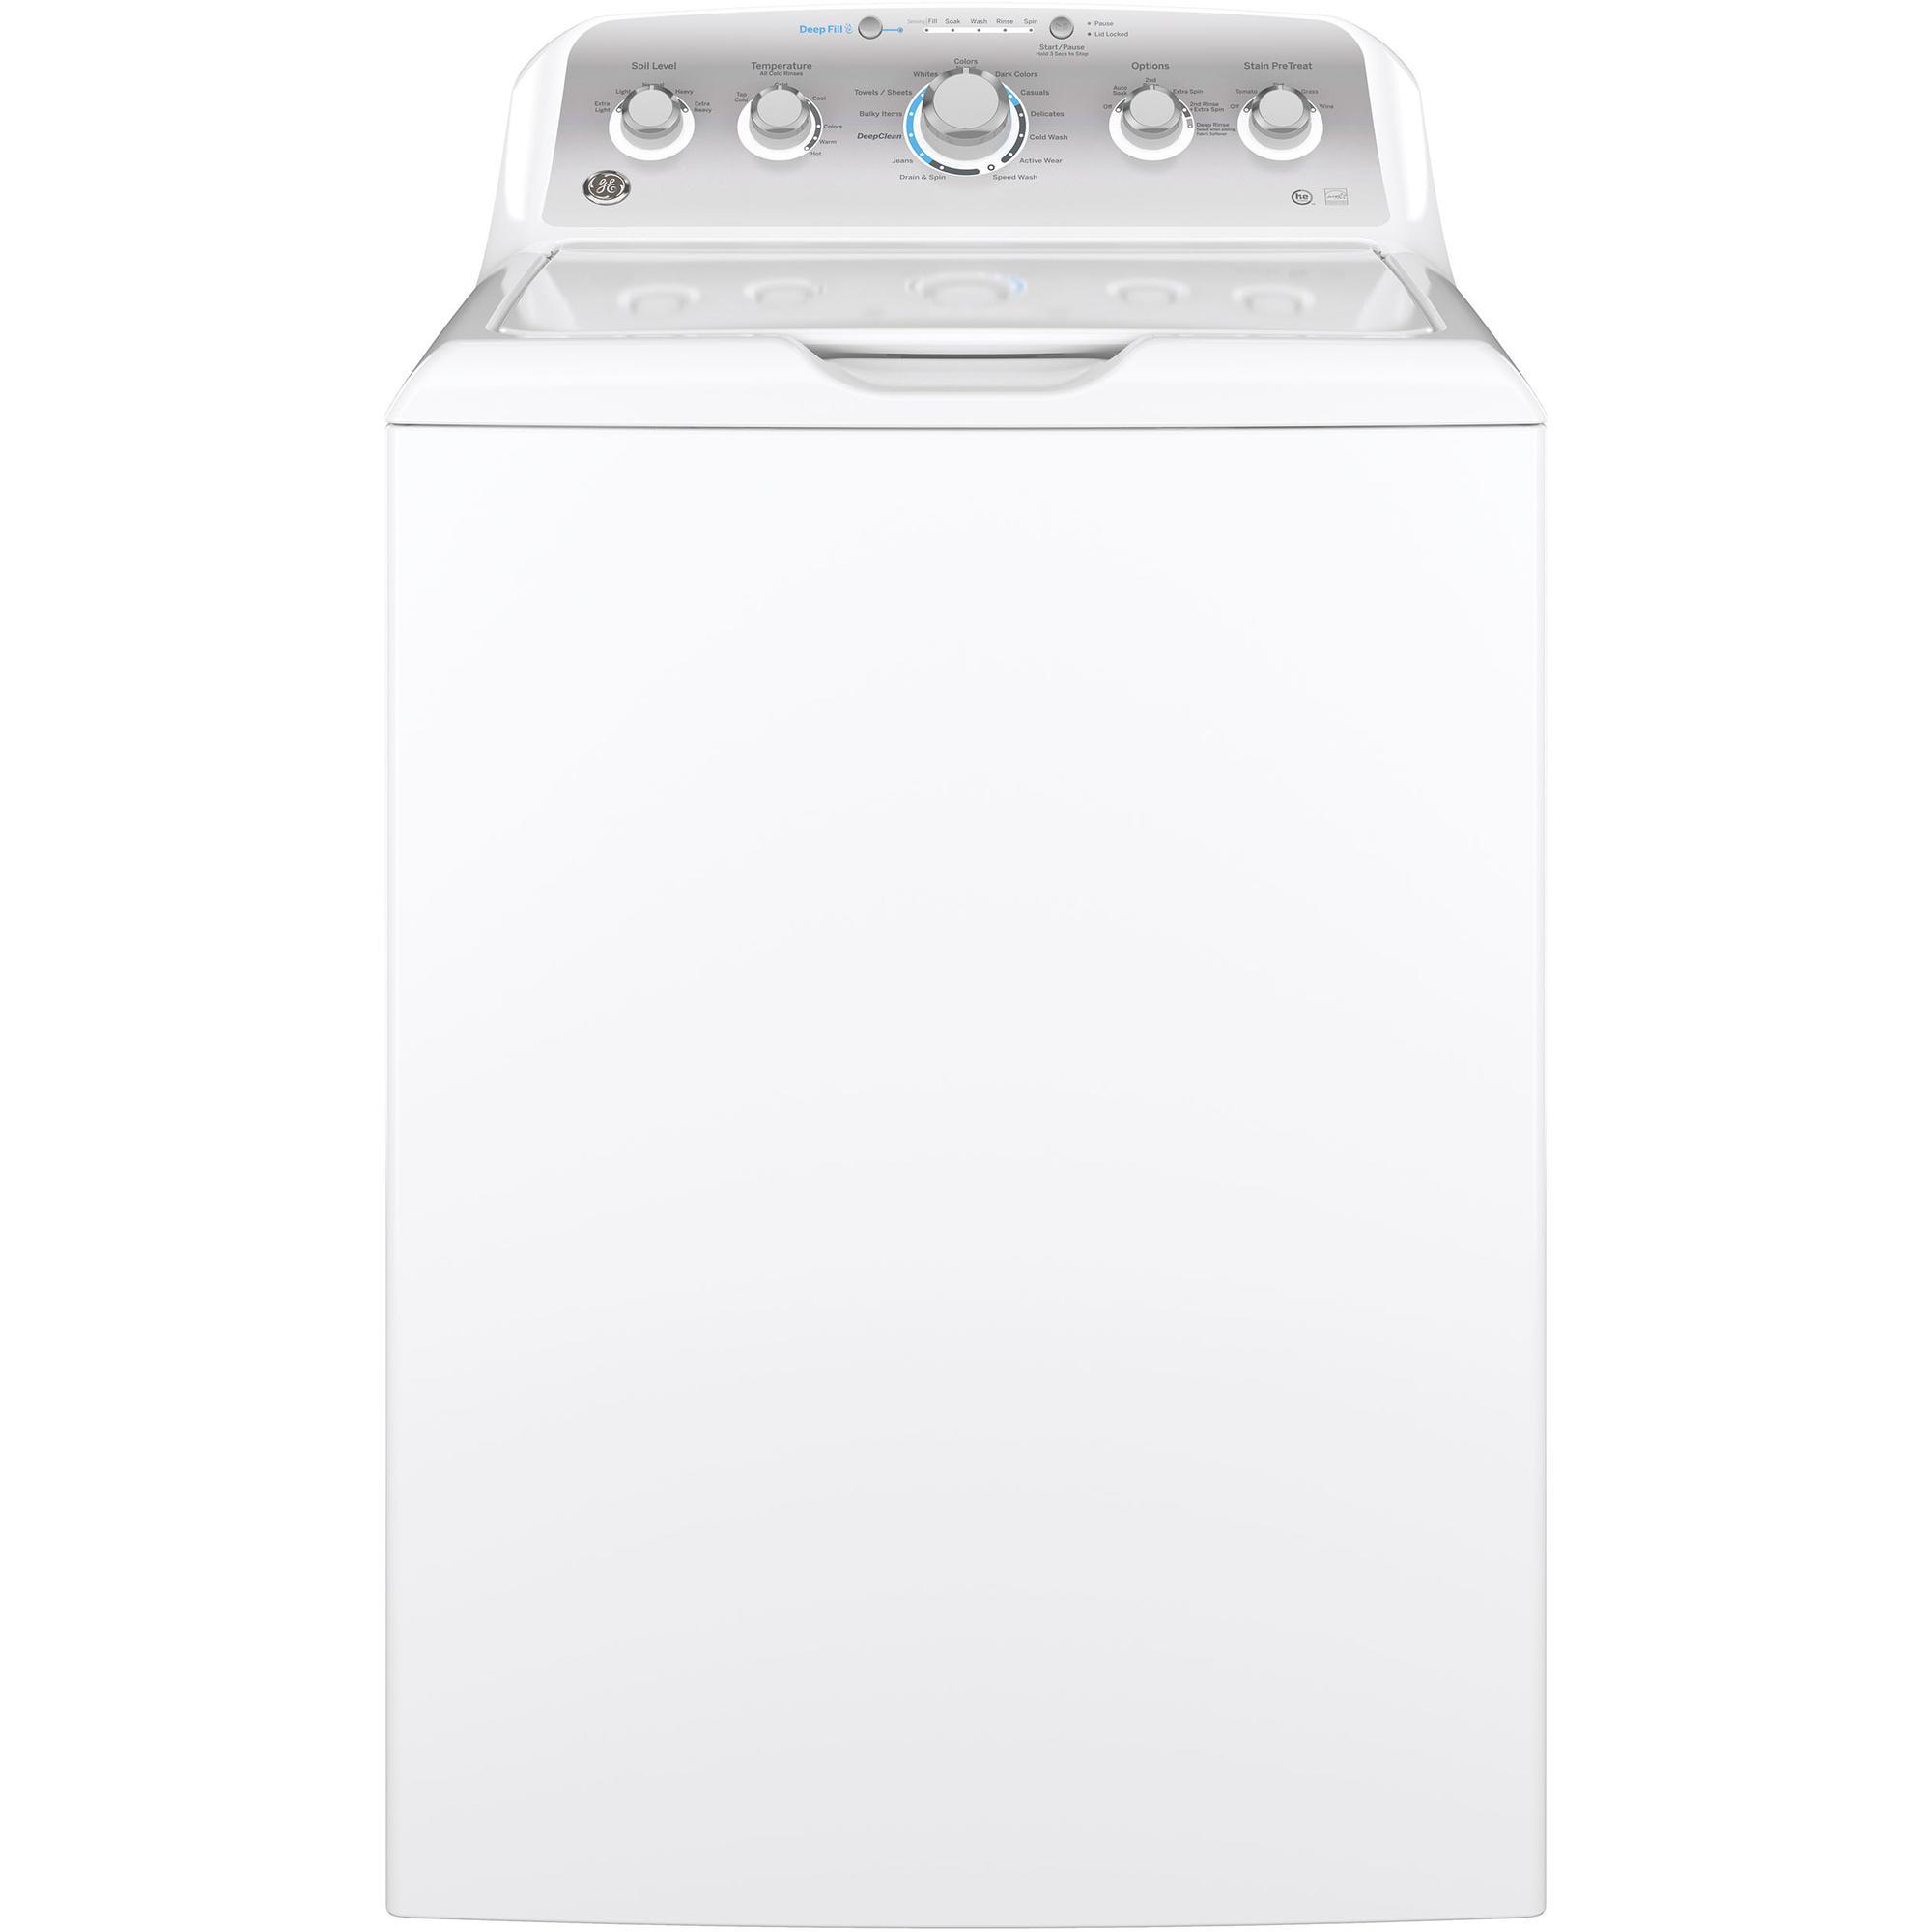 GE Appliances GTW500ASNWS 4.6 cu. ft. Washer with Stainless Steel Basket - White